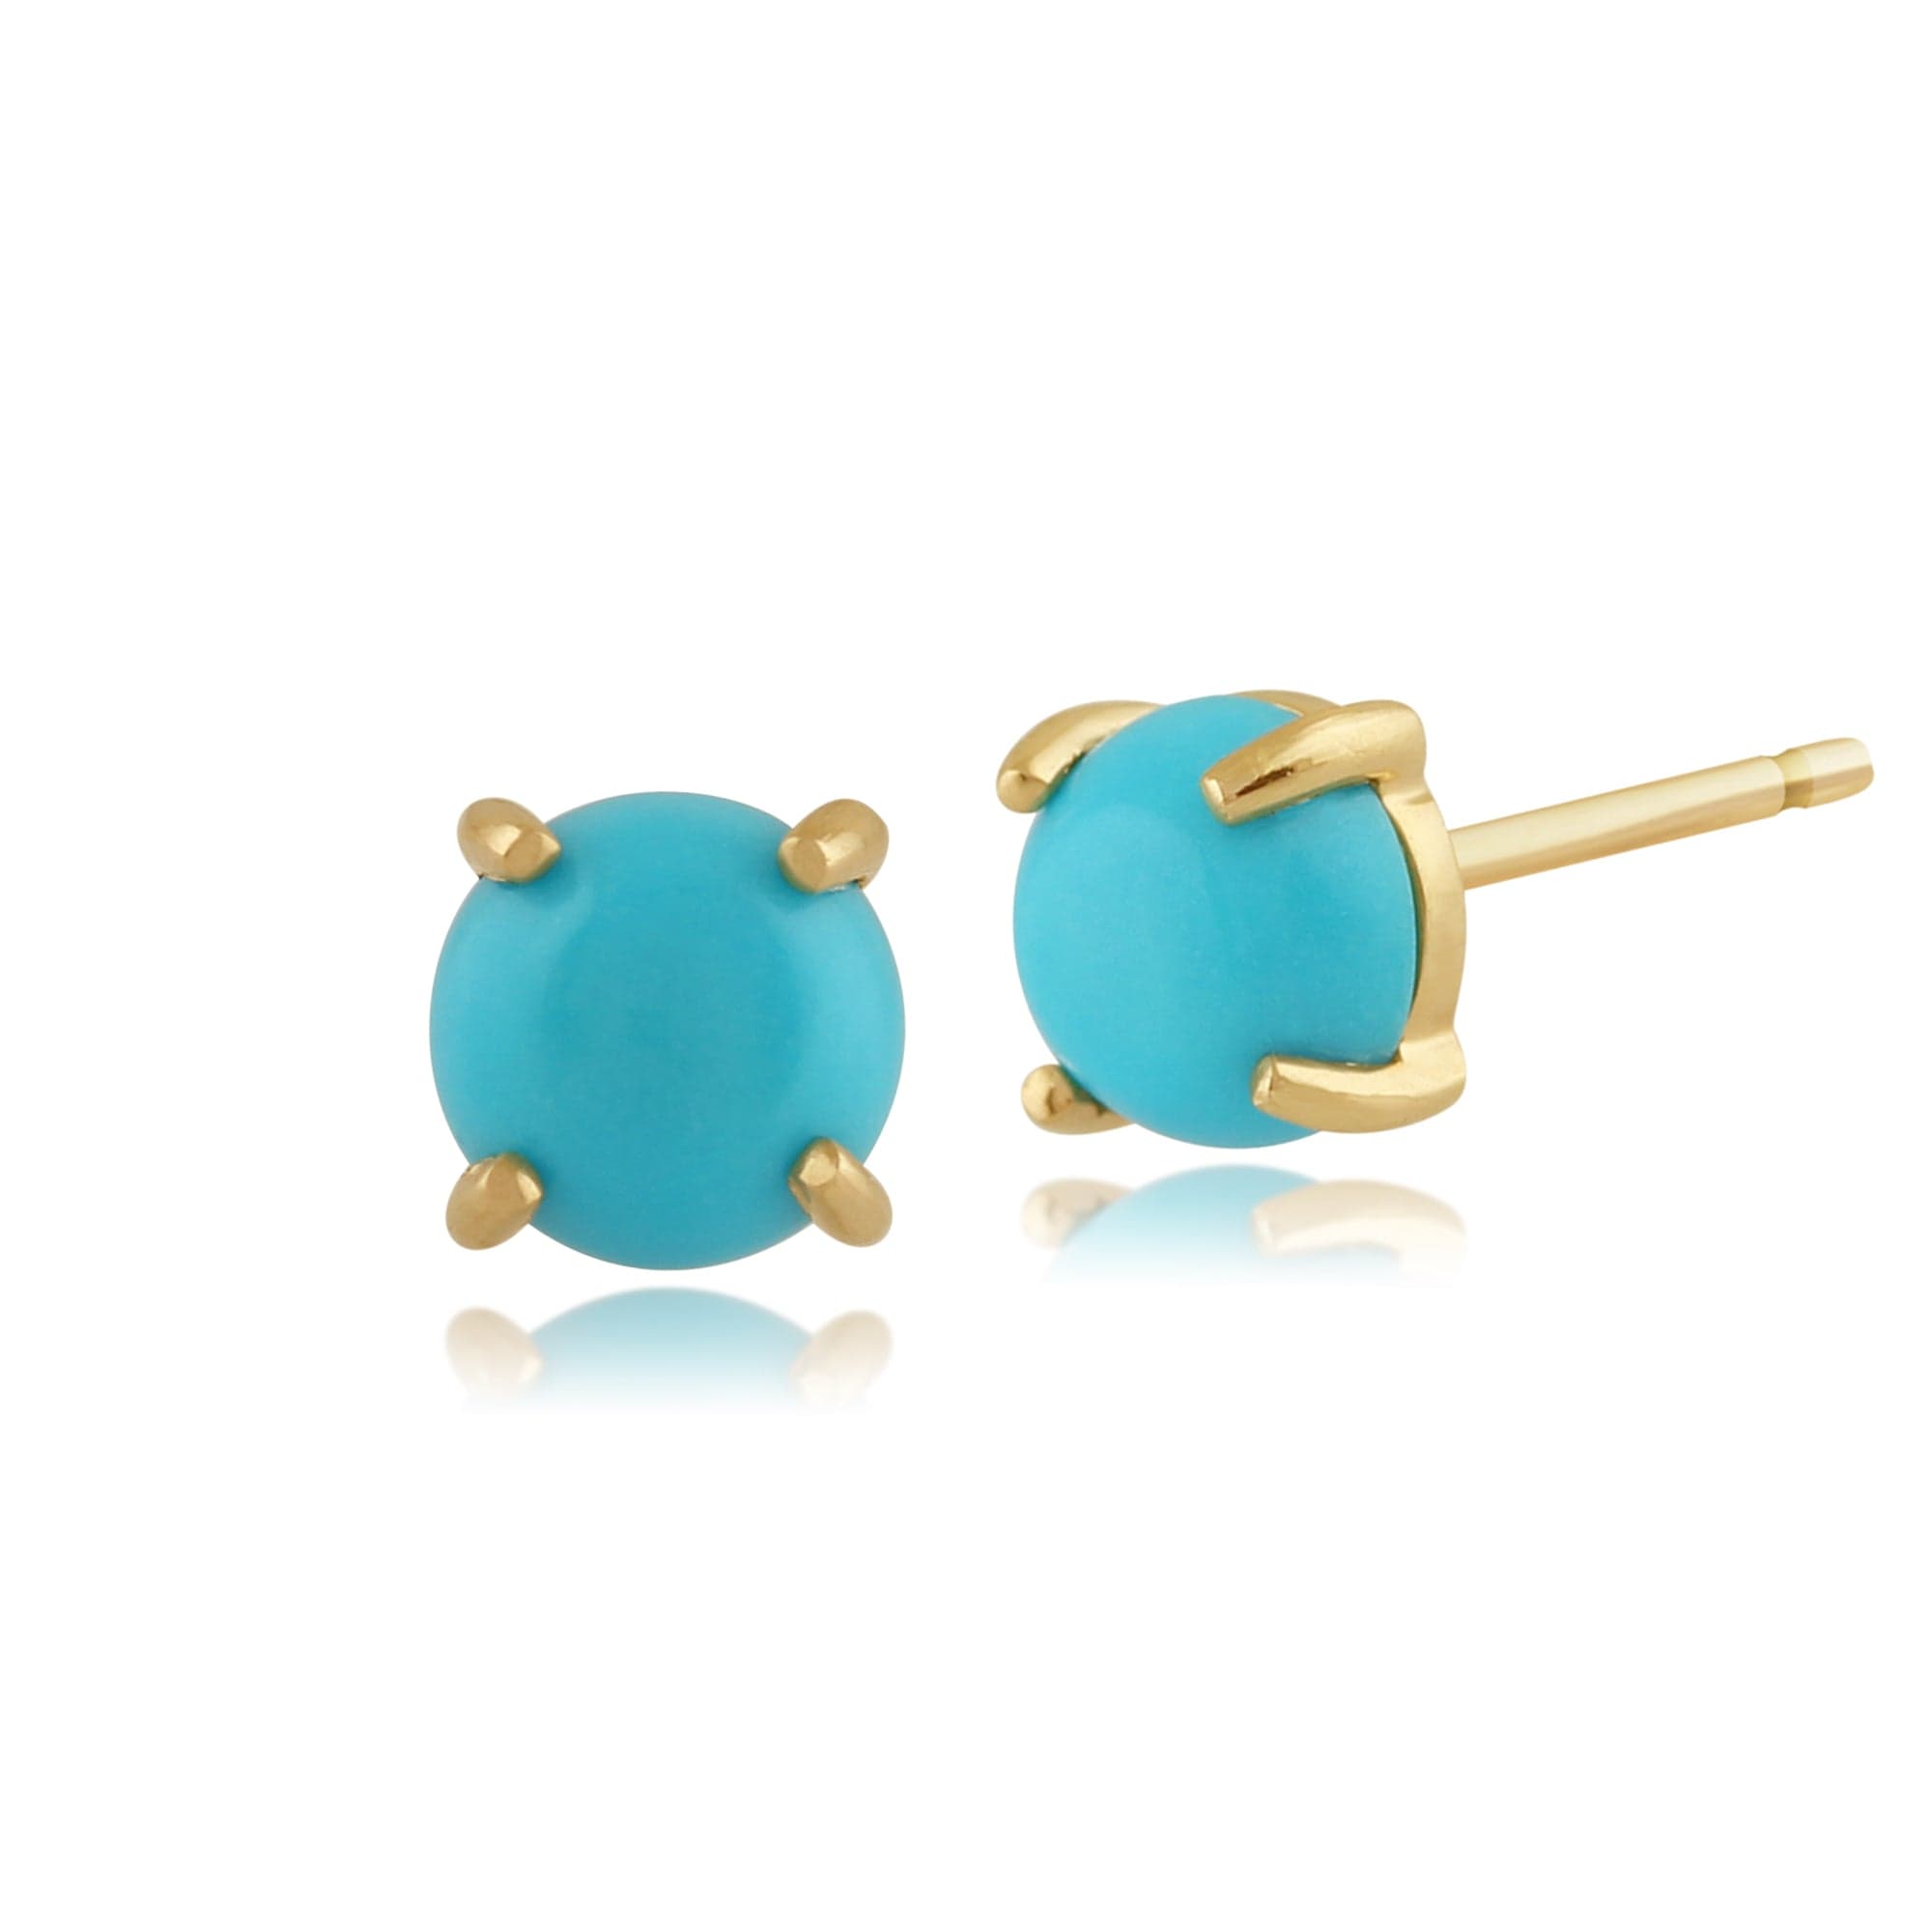 Classic Round Turquoise Cabochon Stud Earrings in 9ct Gold - Gemondo